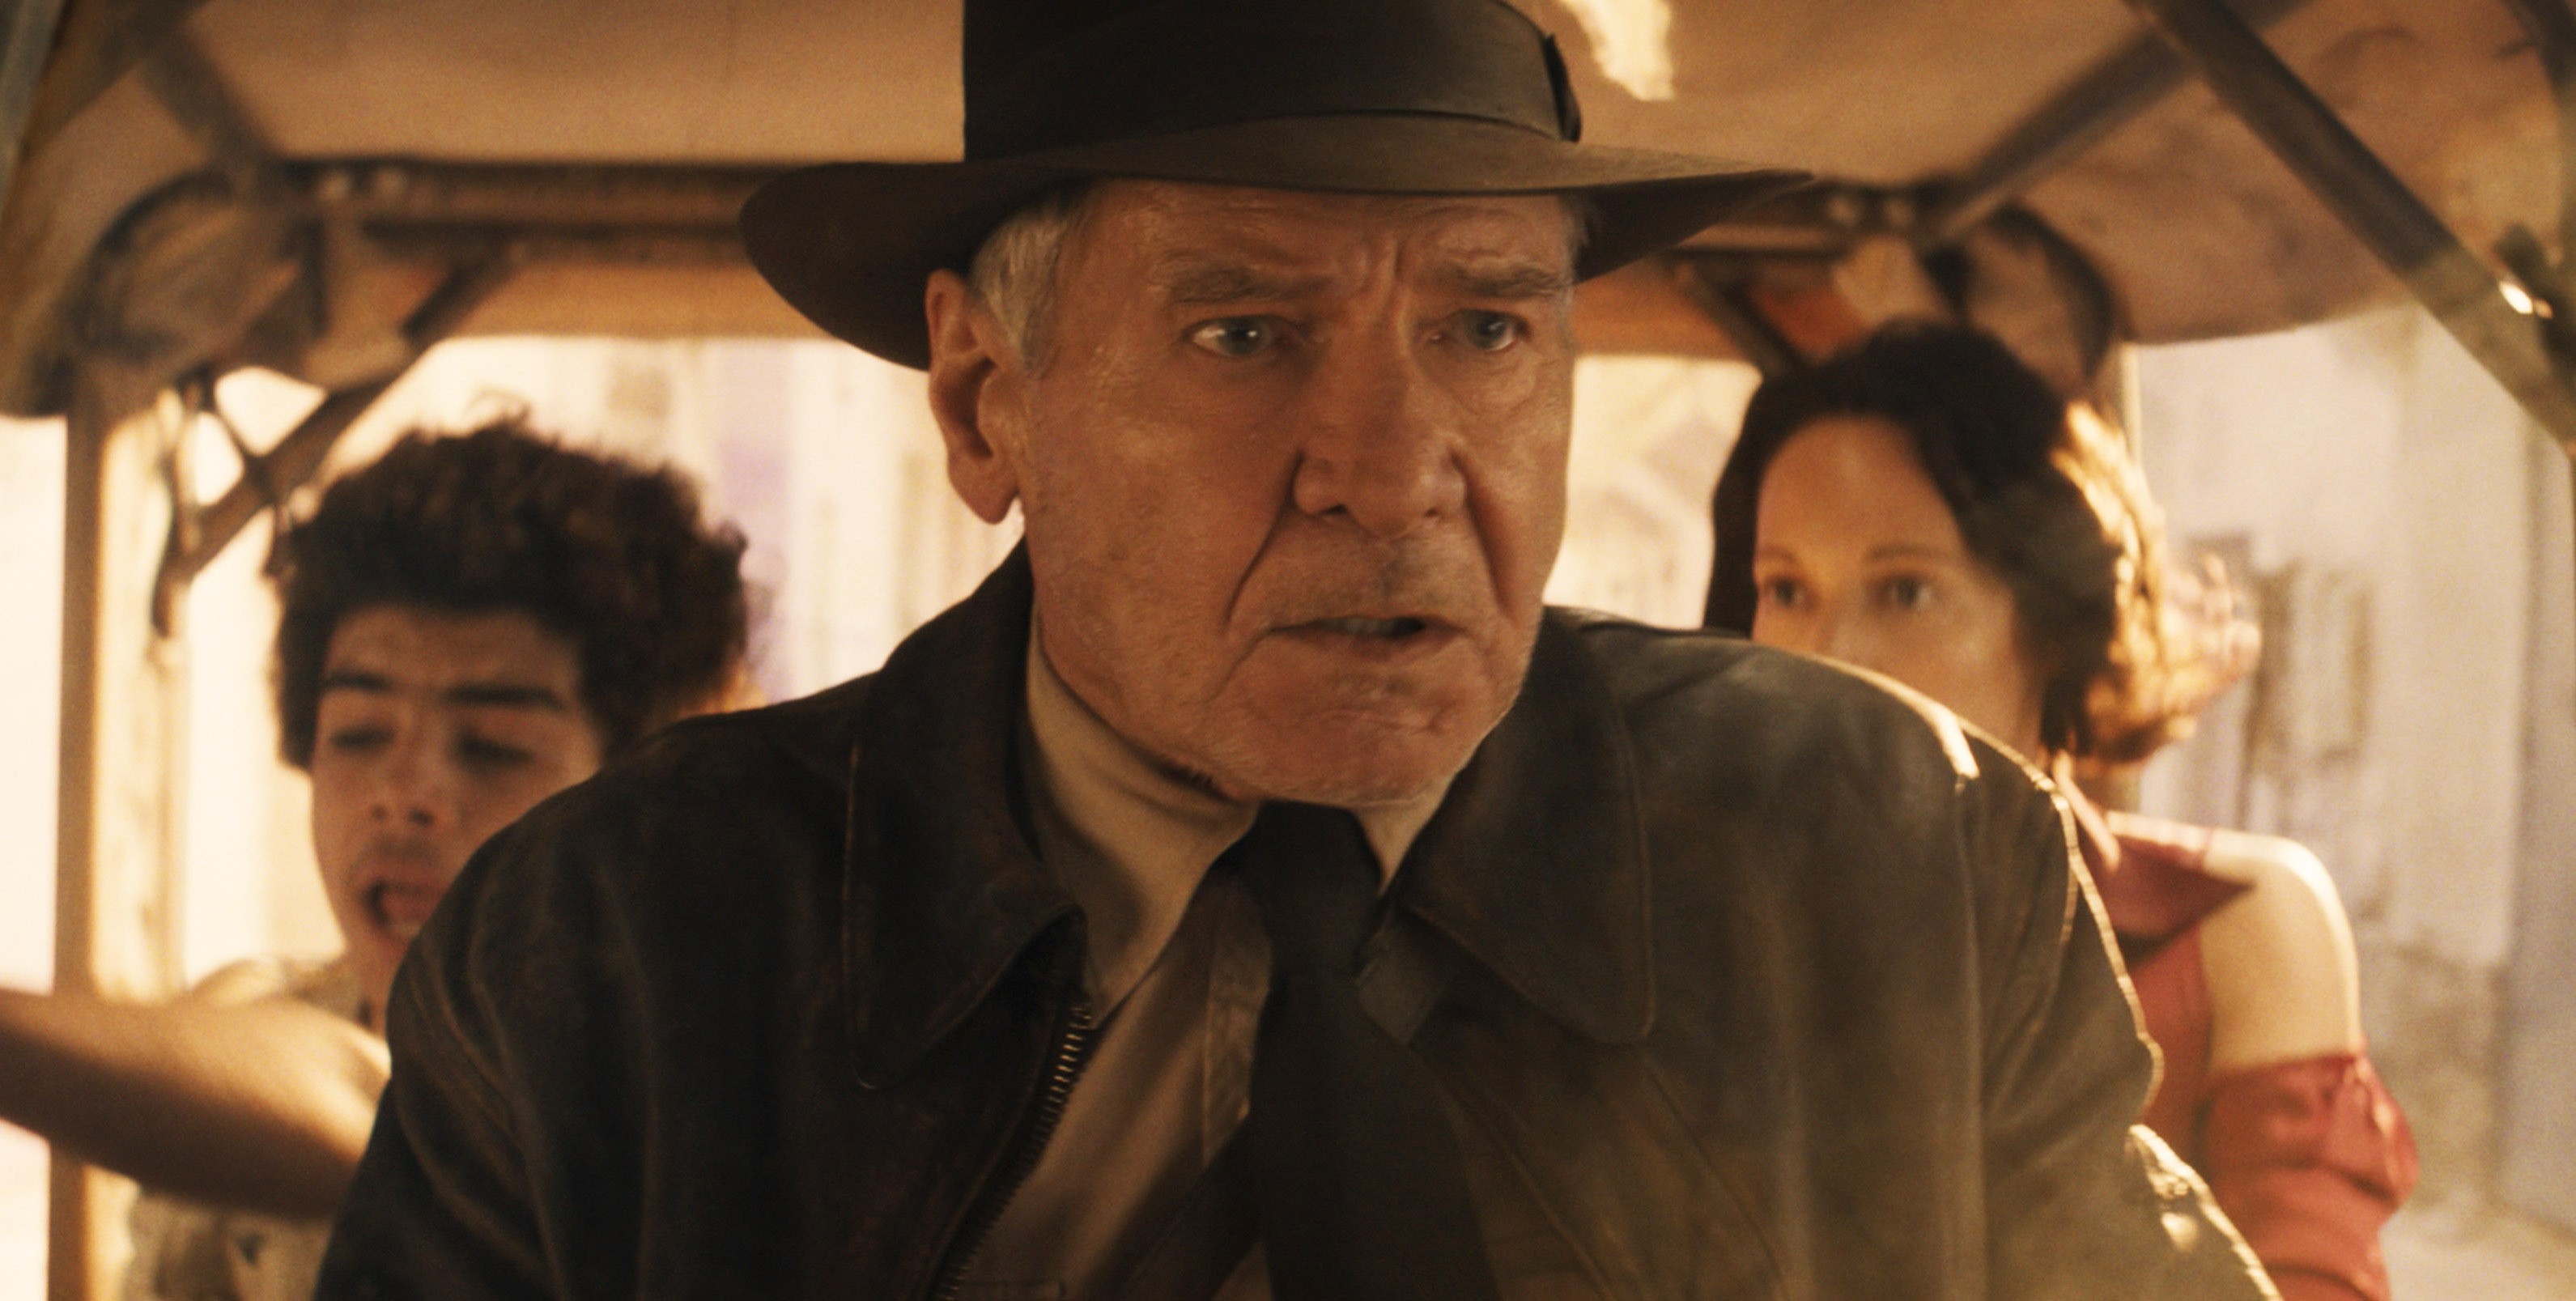 Indiana Jones - Harrison Ford - Character profile and chronology 